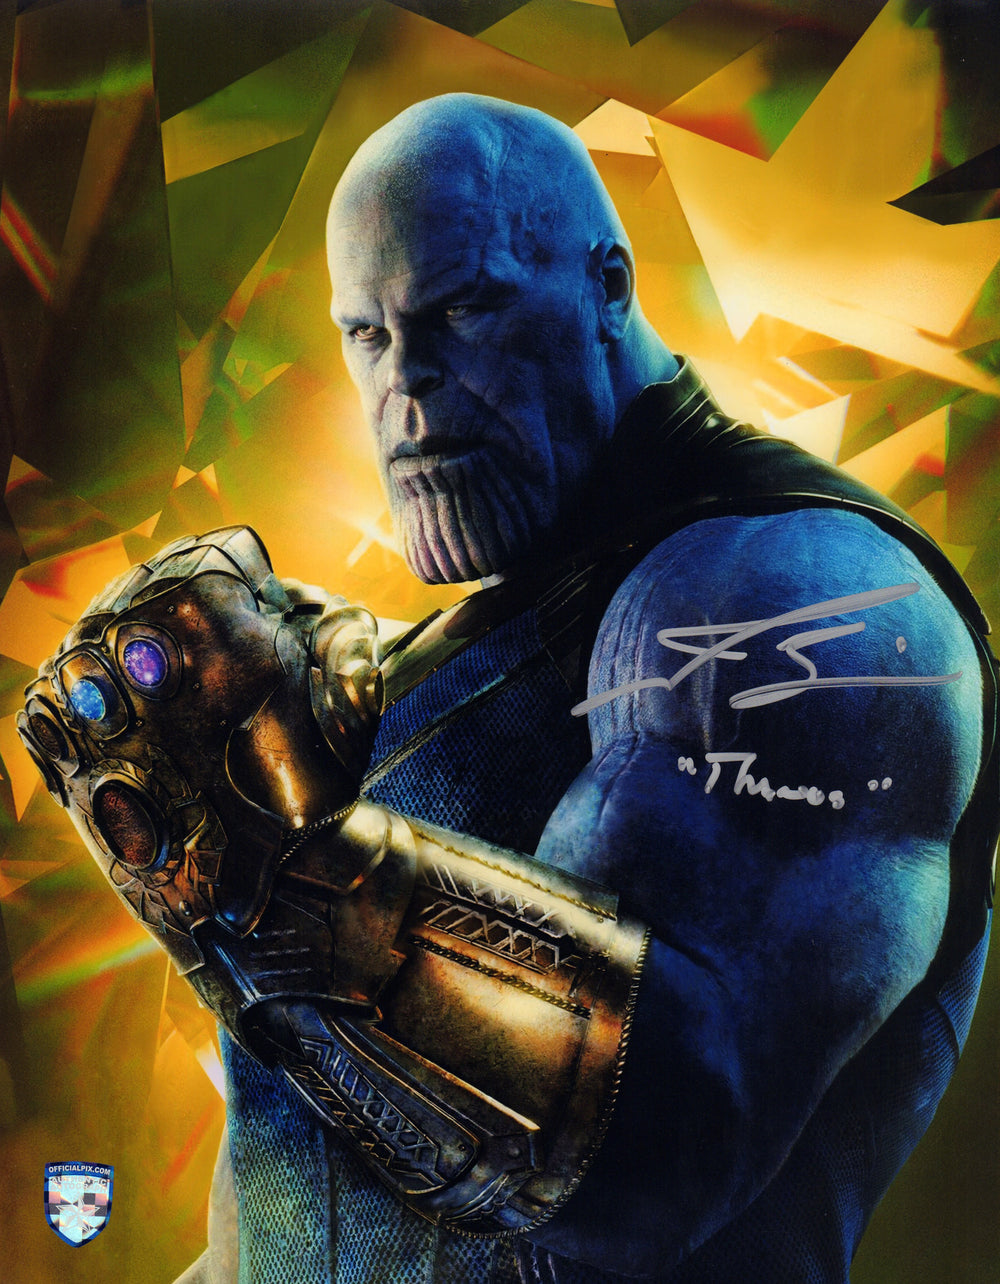 Josh Brolin as Thanos in Avengers: Infinity War (Official Pix) Signed 11x14 Photo with Character Name